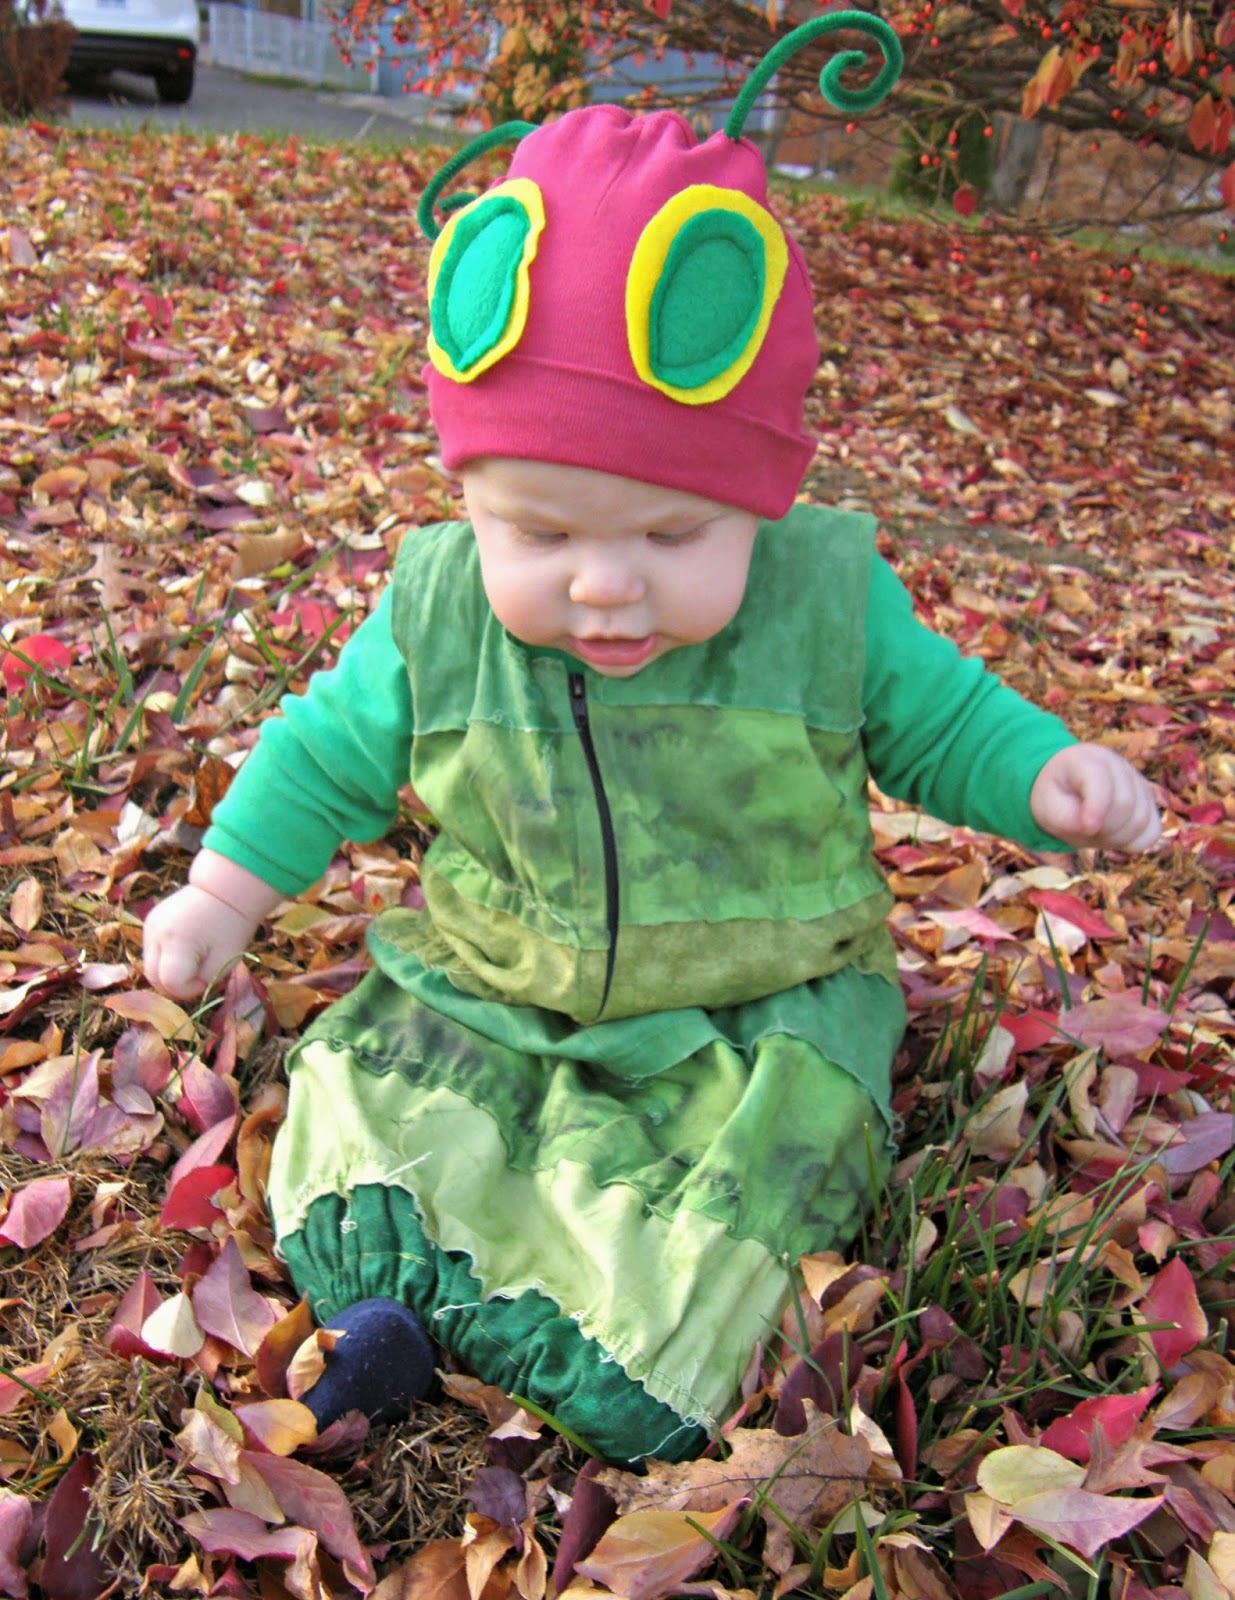 Mommykakes: The Very Hungry Caterpillar Costume